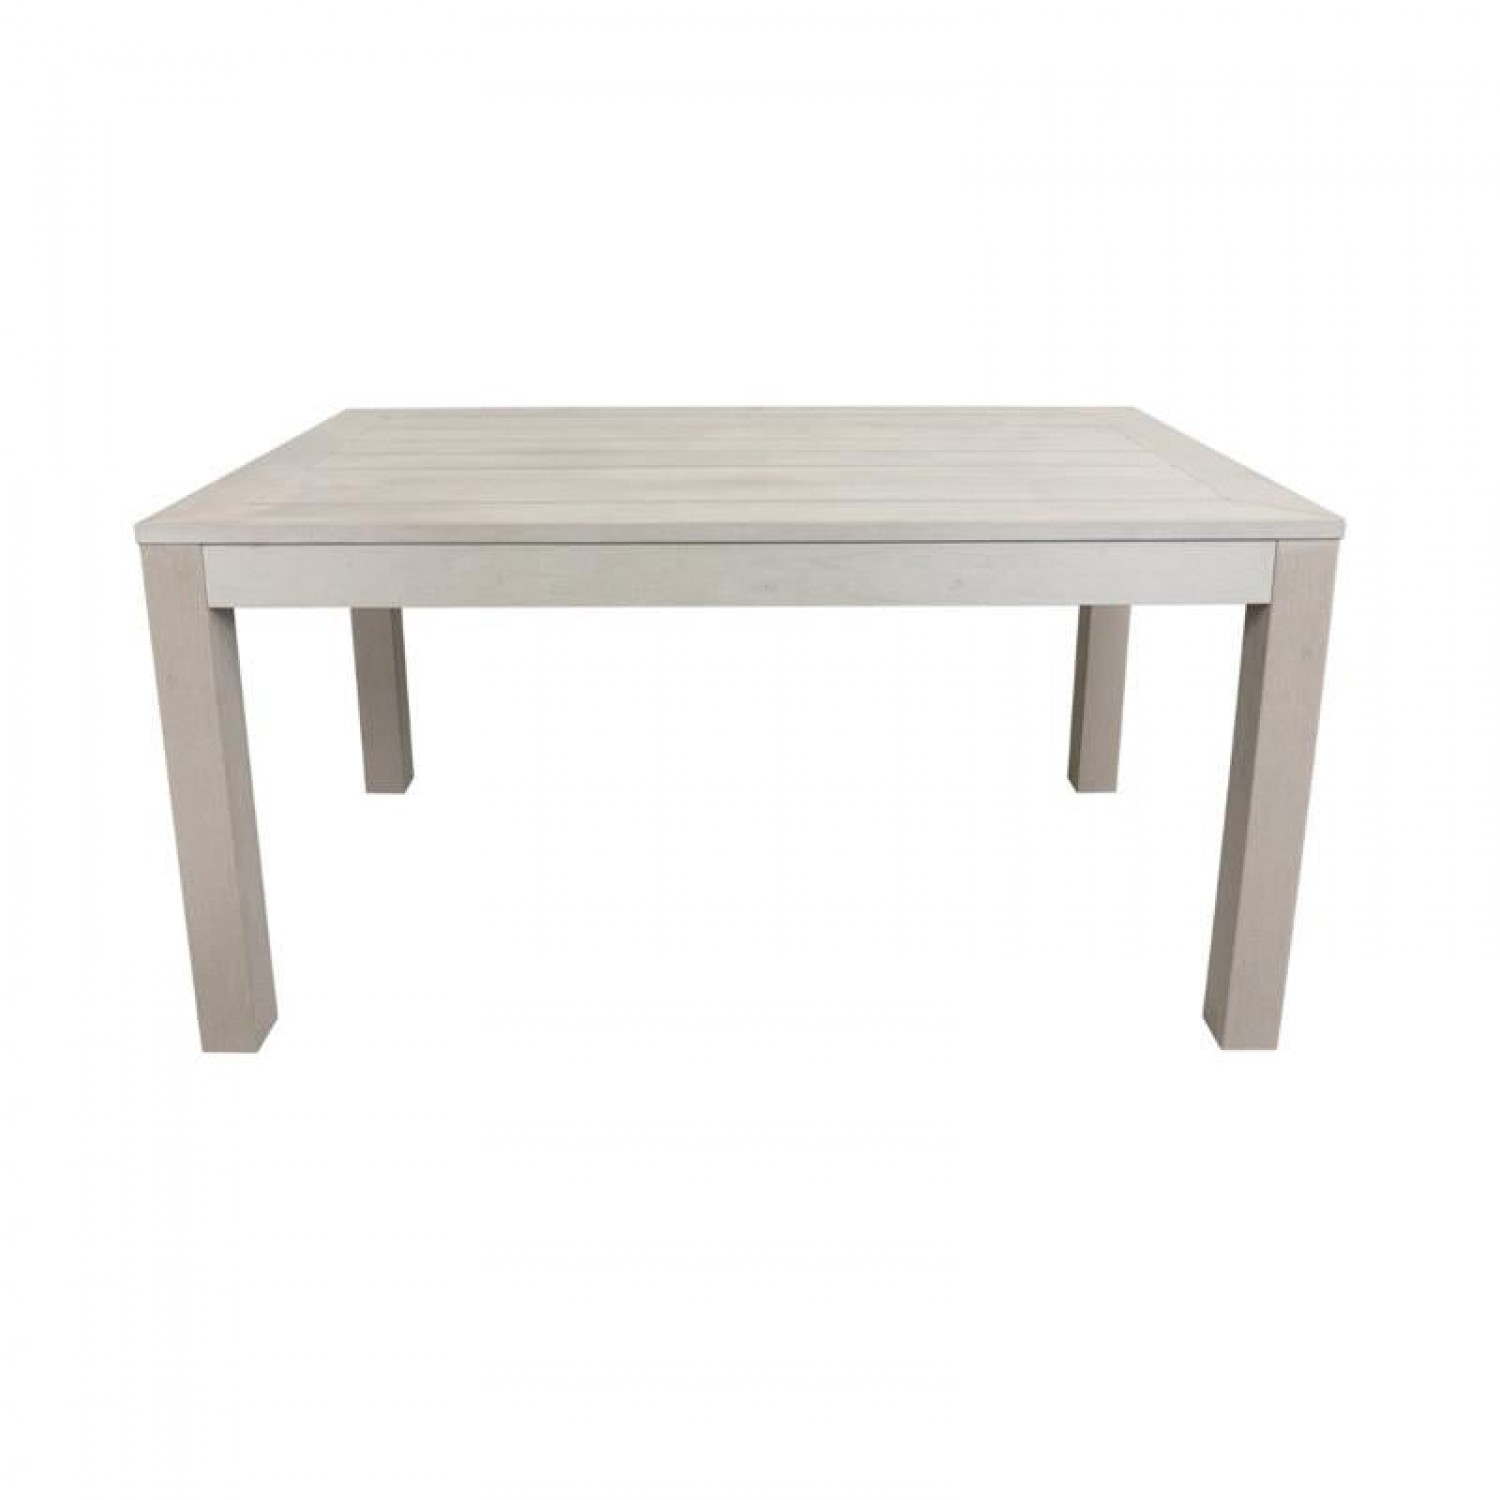 Chateau Outdoor Dining Table